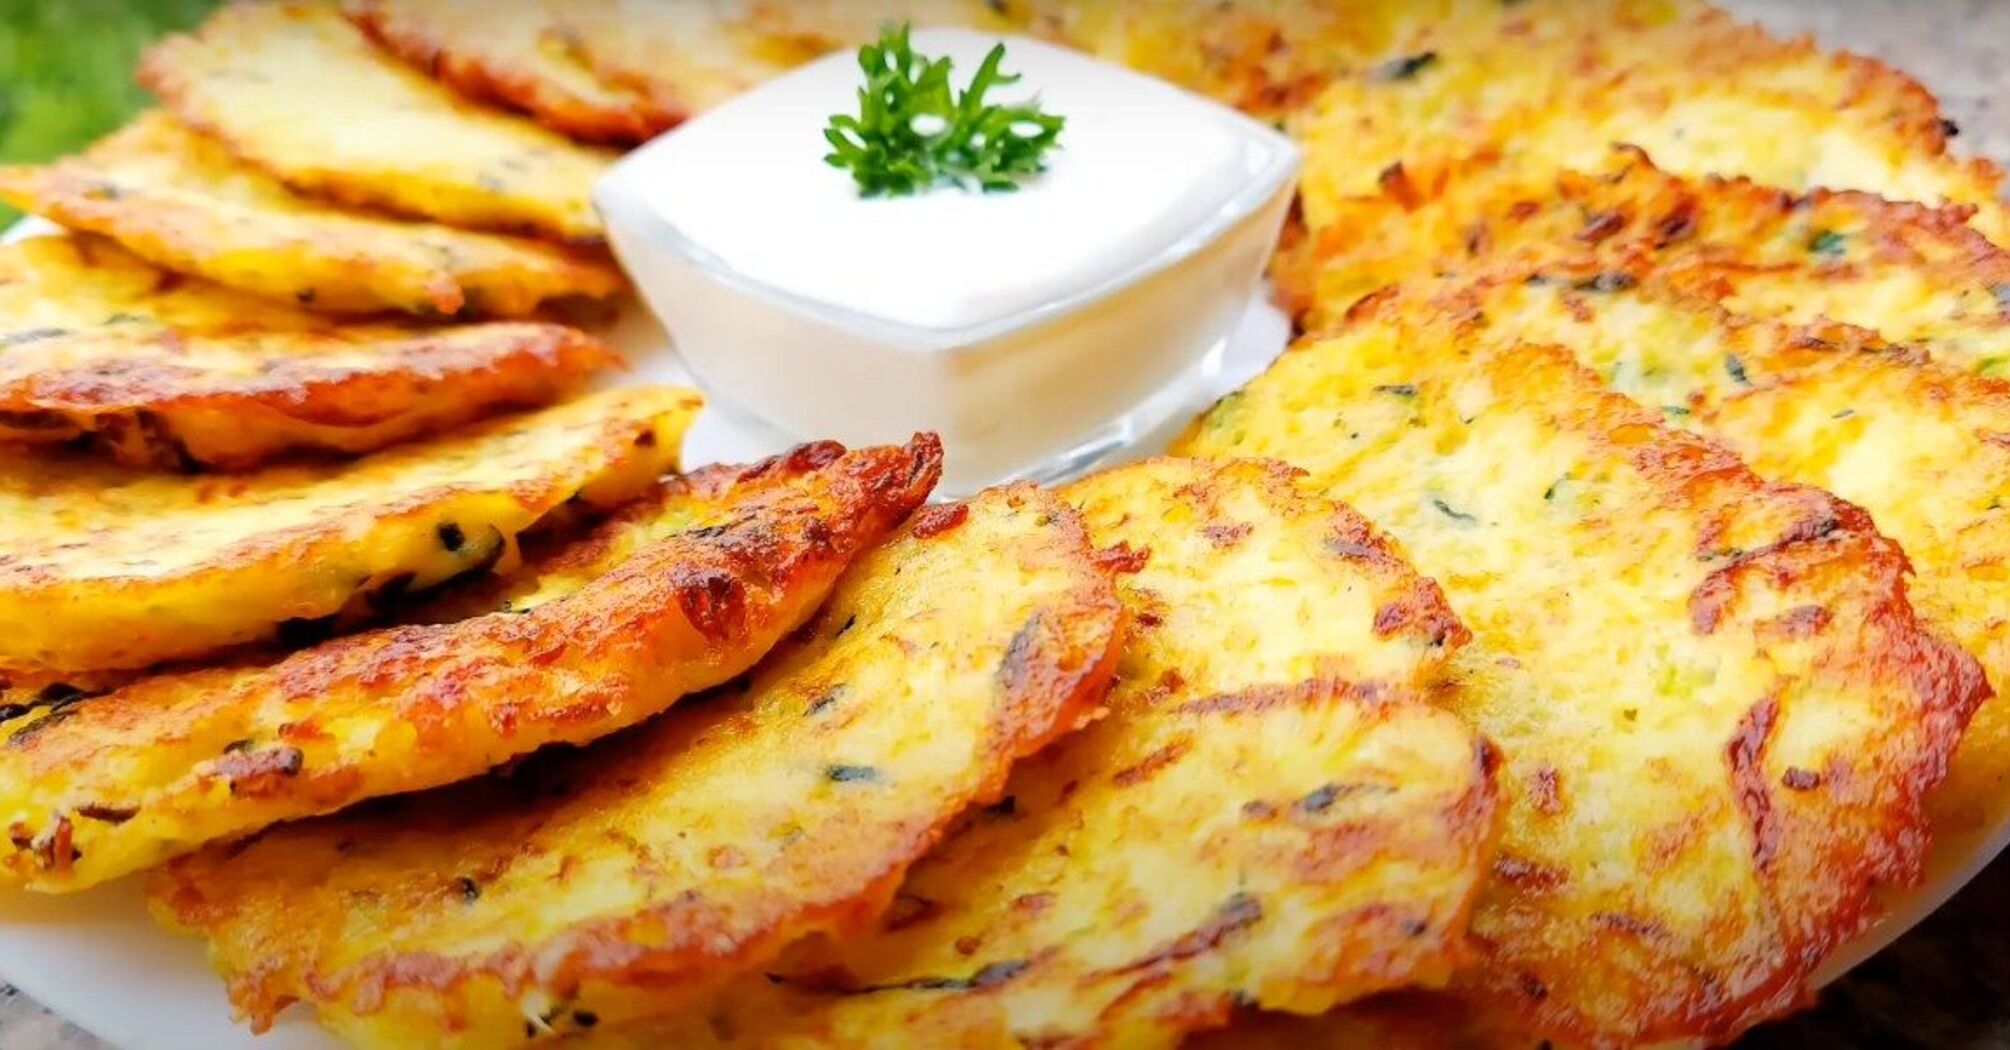 Delicious and healthy fried potato pancakes for children: minimum flour and oil